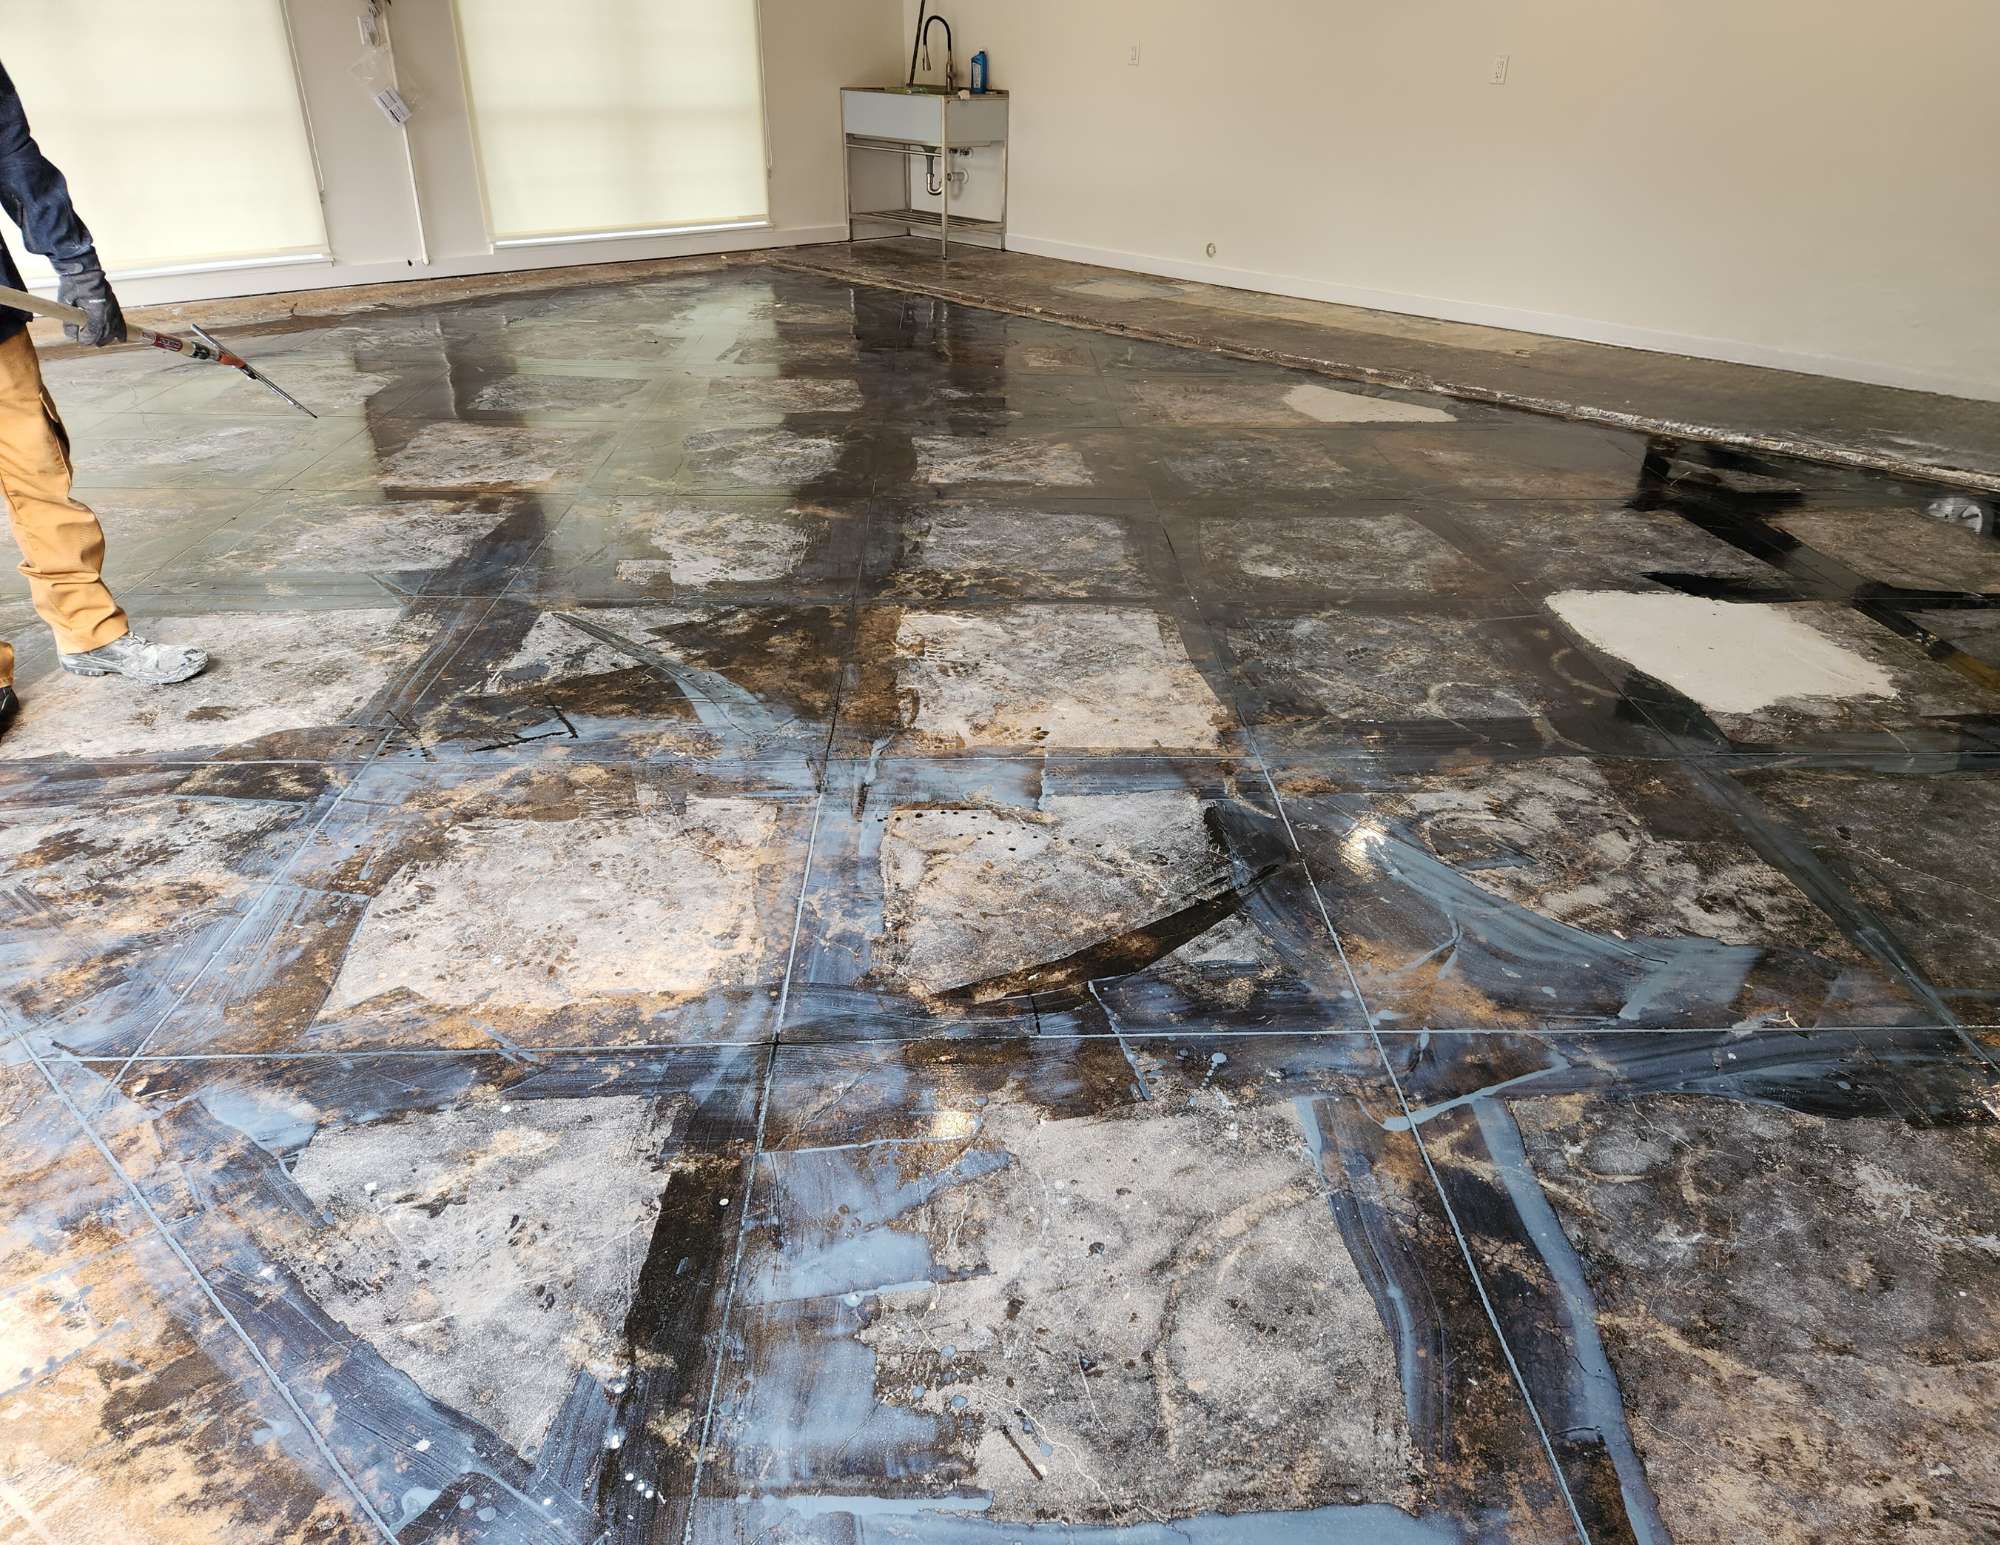 a Garage Floor Undergoing Preparation Before Applying a Polyaspartic Coating, Showing the Cleaned and Repaired Surface. - Preparing a Garage Floor for Coating